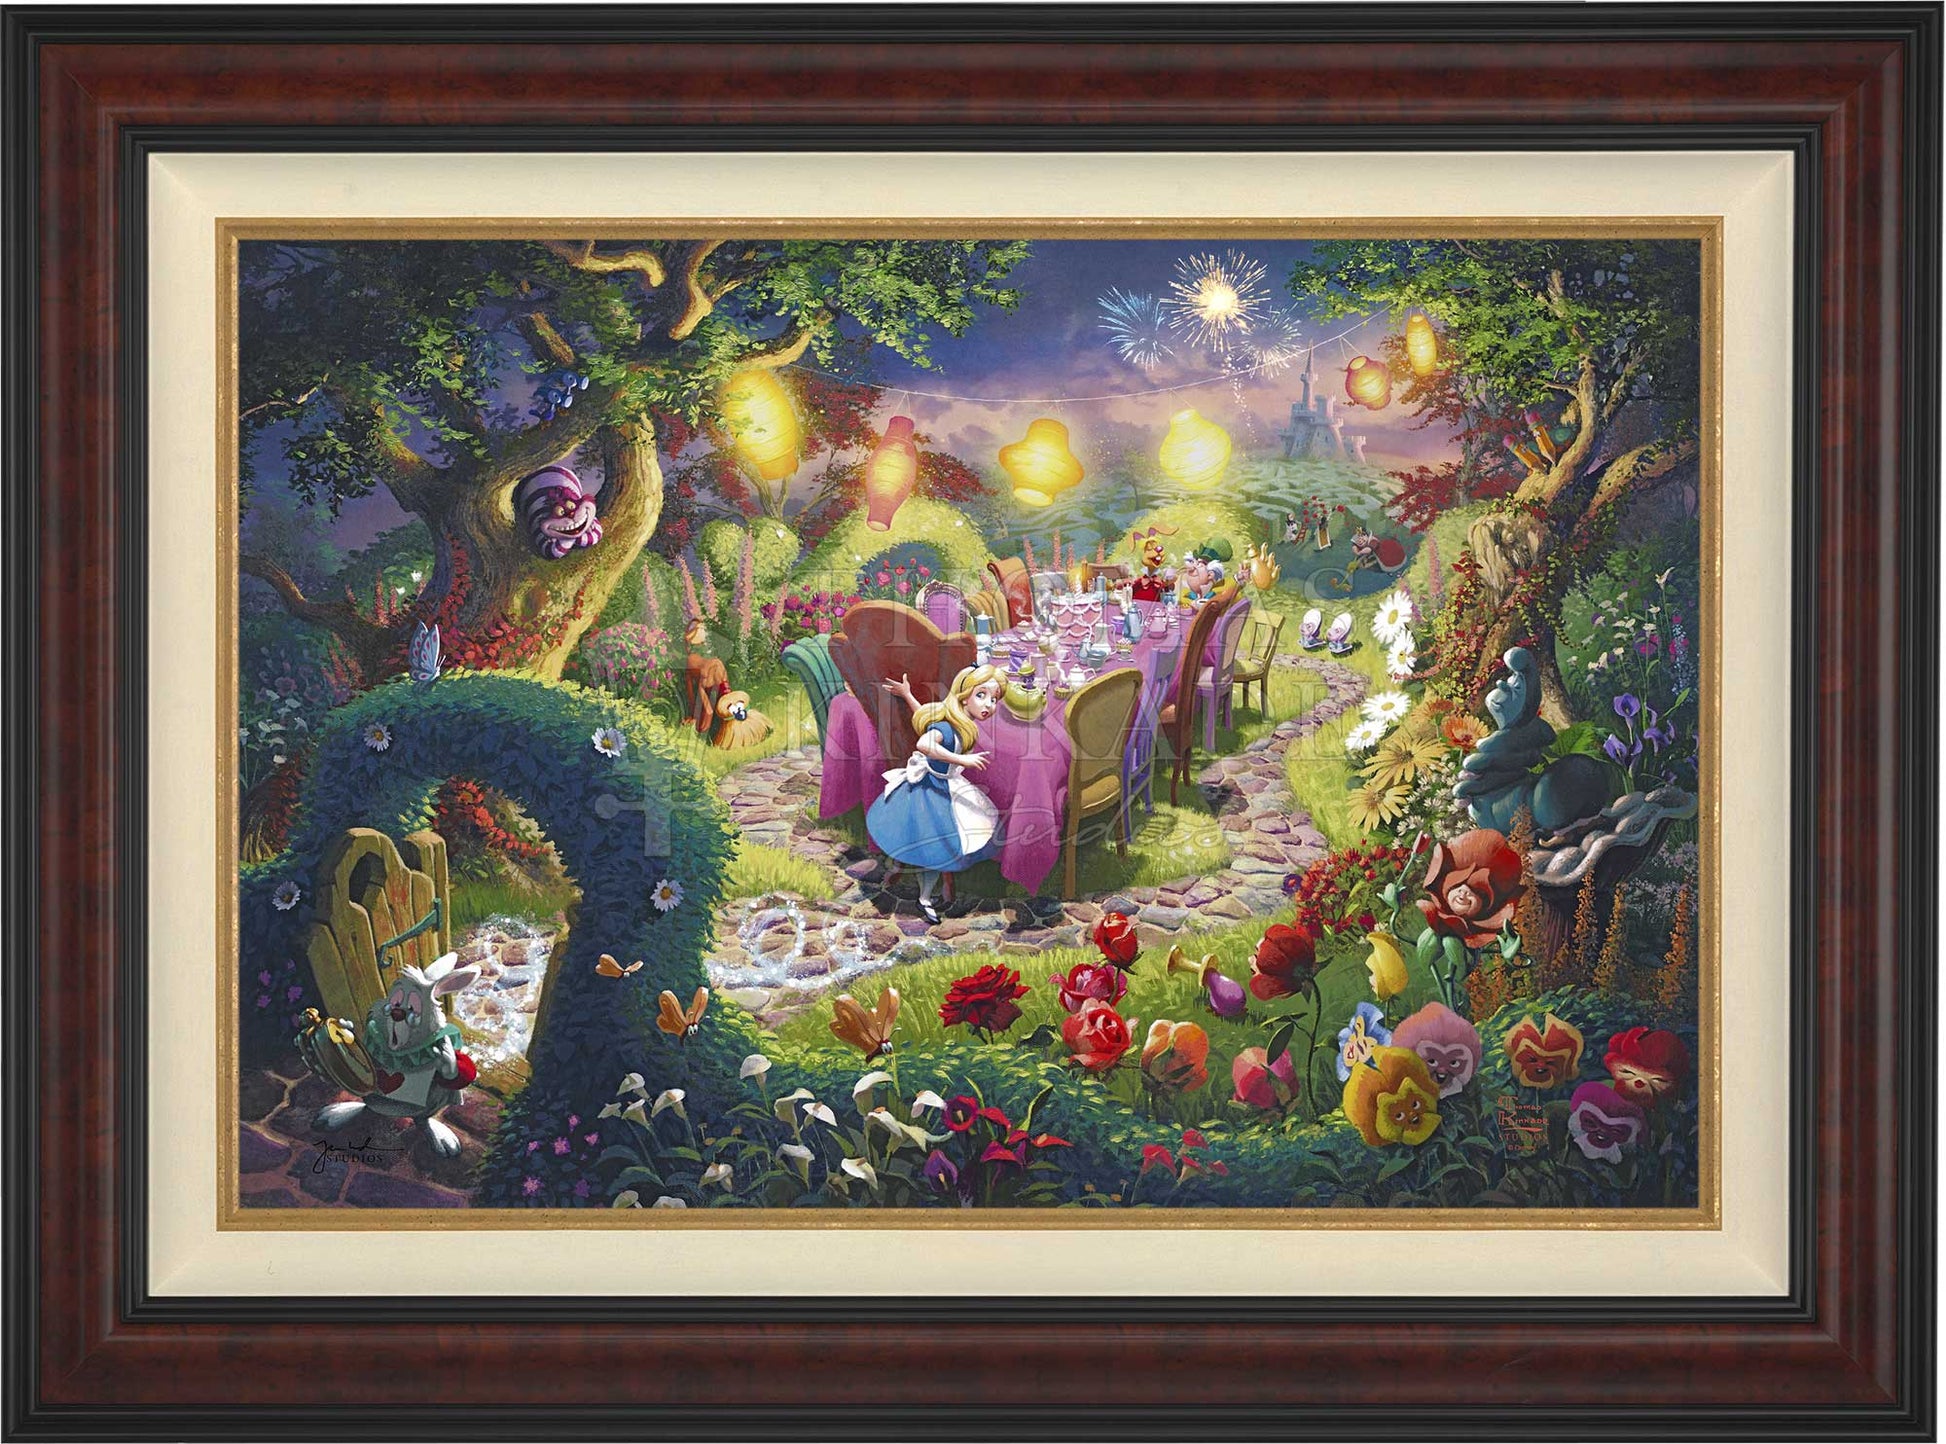 Disney Mad Hatter's Tea Party - 8 x 10 Gallery Wrapped Canvas